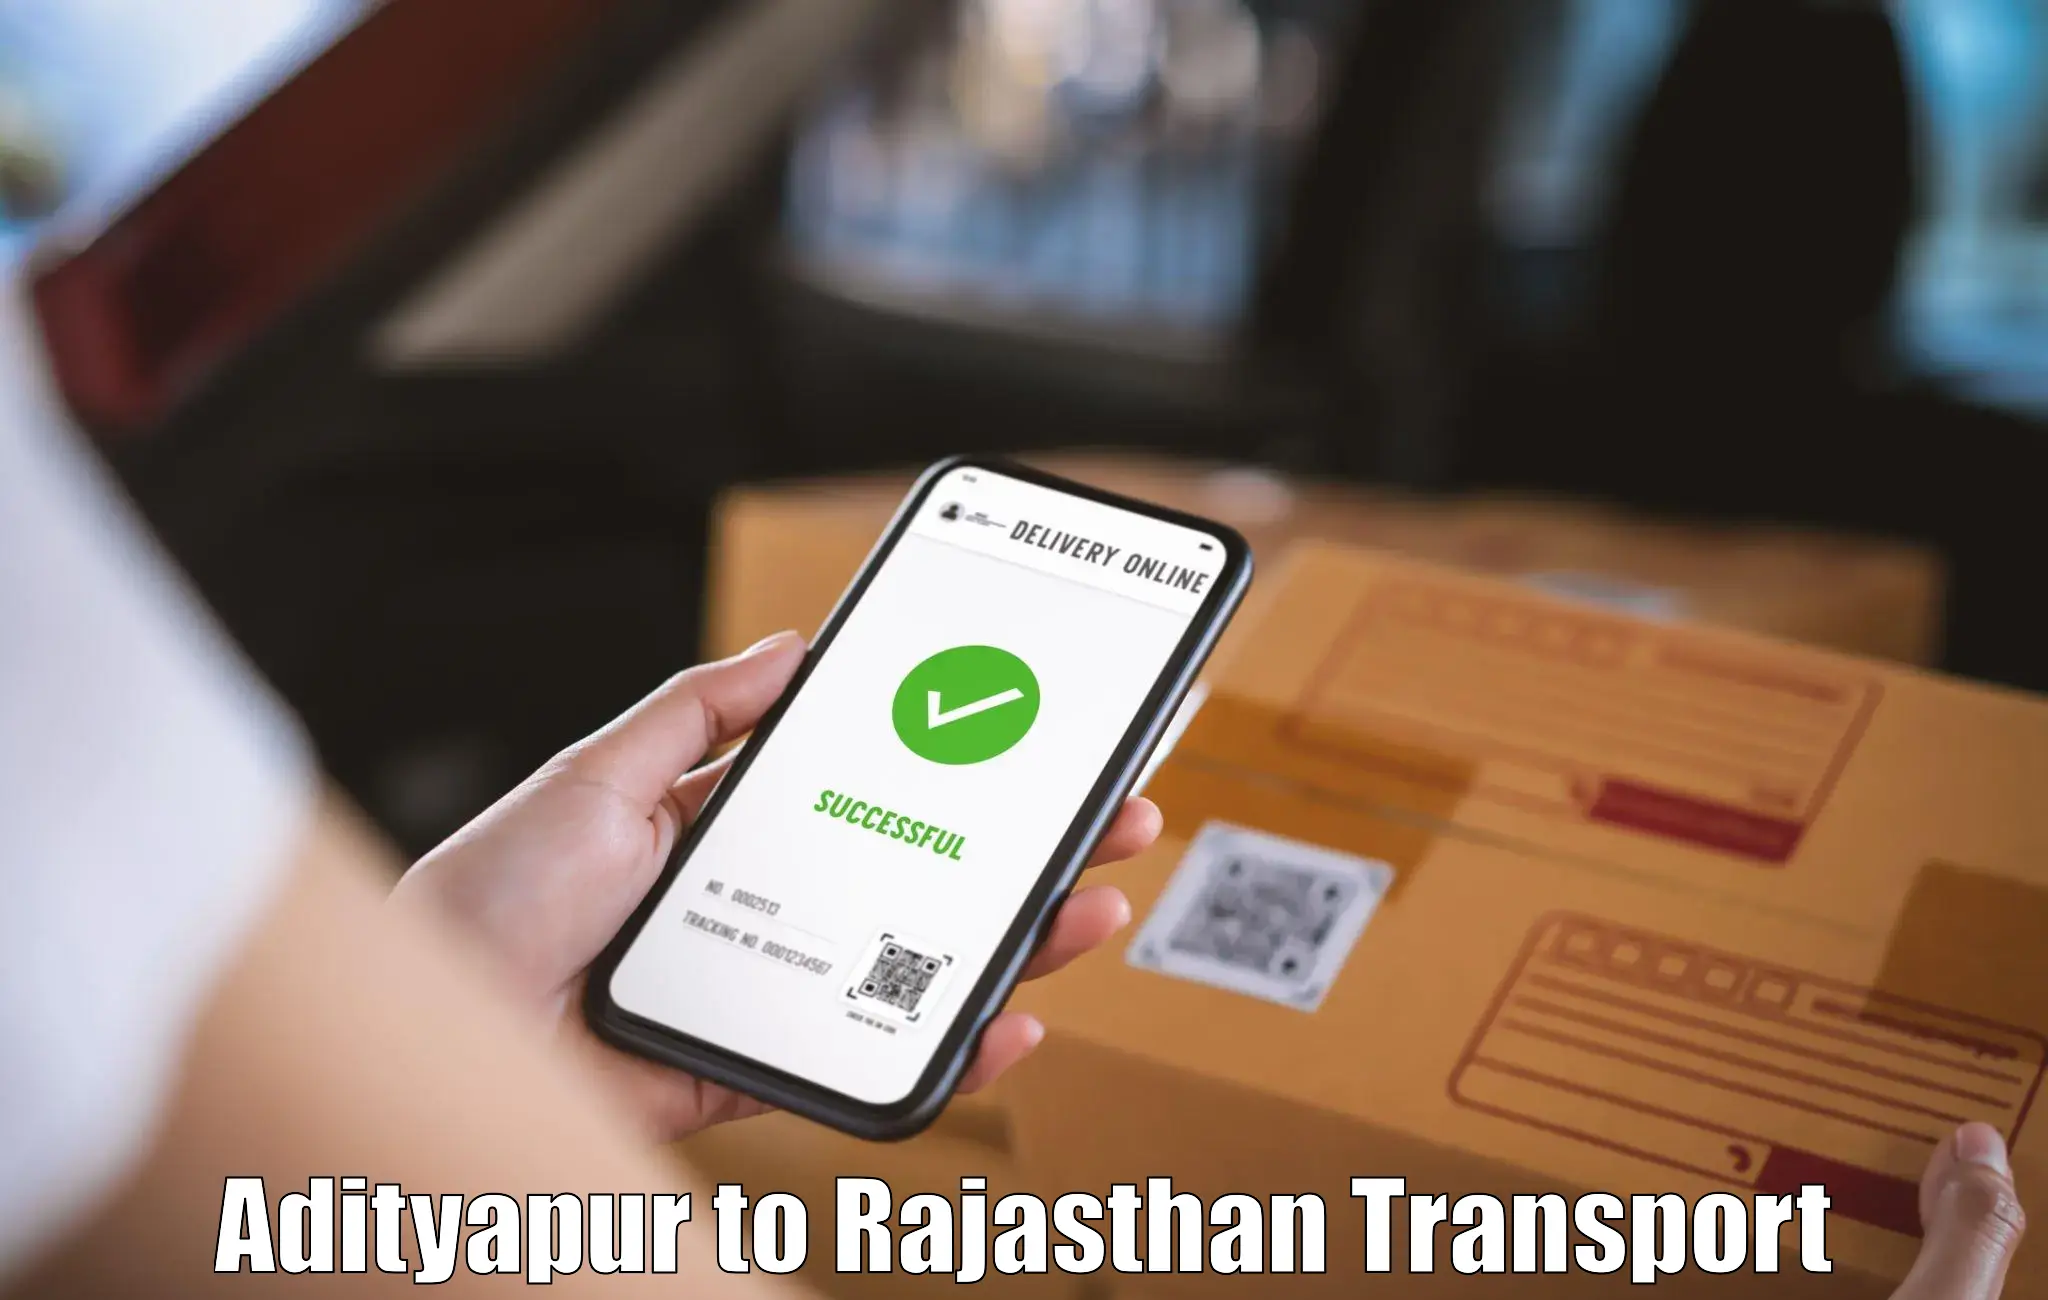 Commercial transport service Adityapur to Rupbas